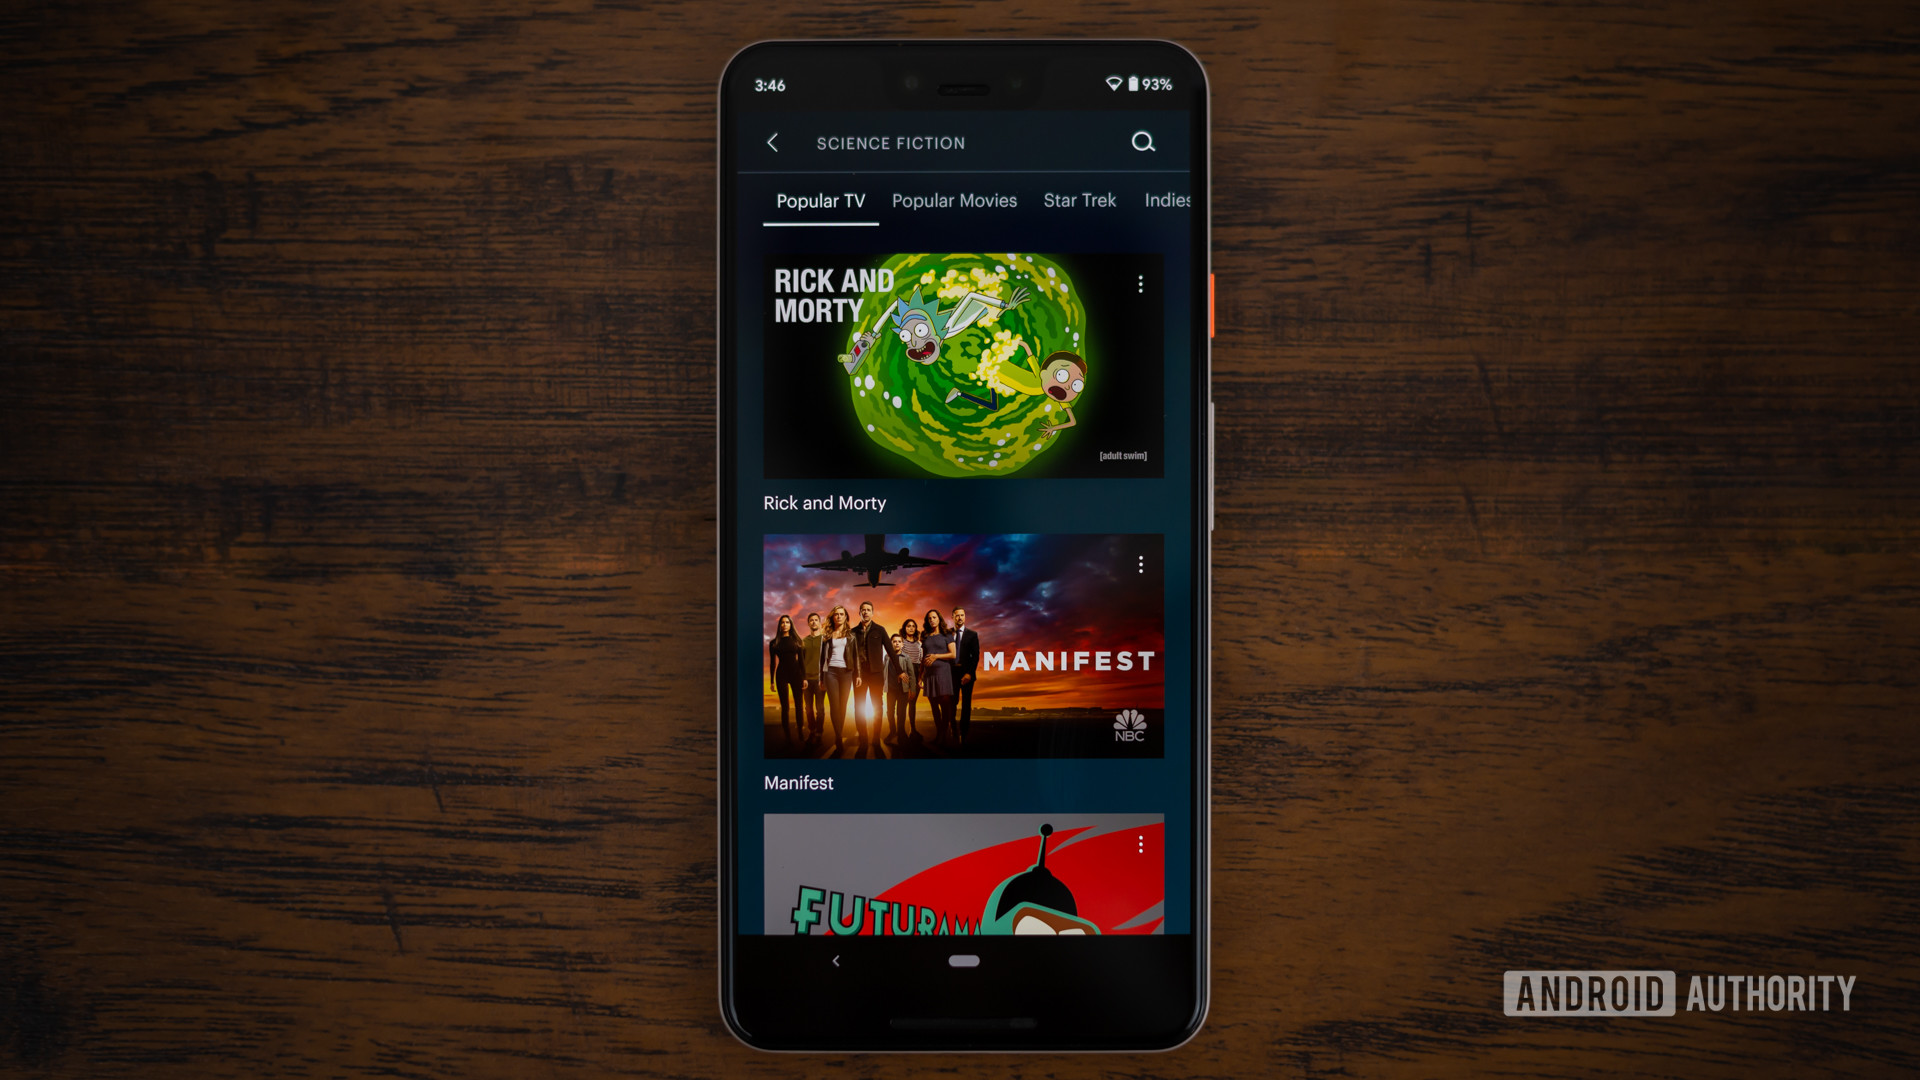 Hulu Science Fiction section shown on smartphone